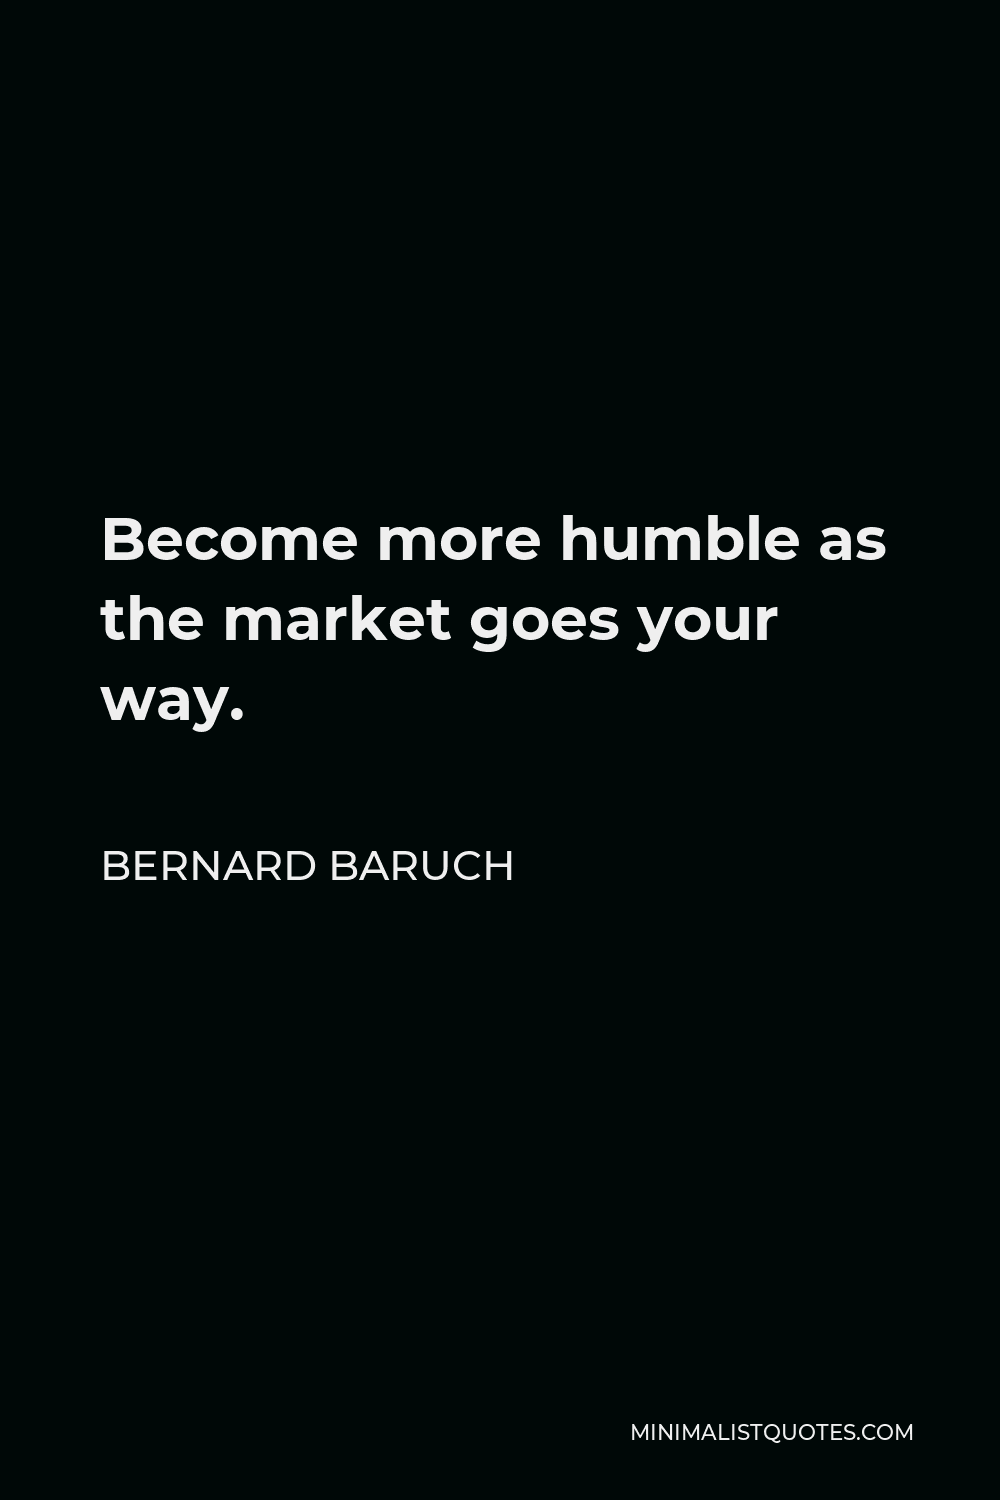 Bernard Baruch Quote - Become more humble as the market goes your way.